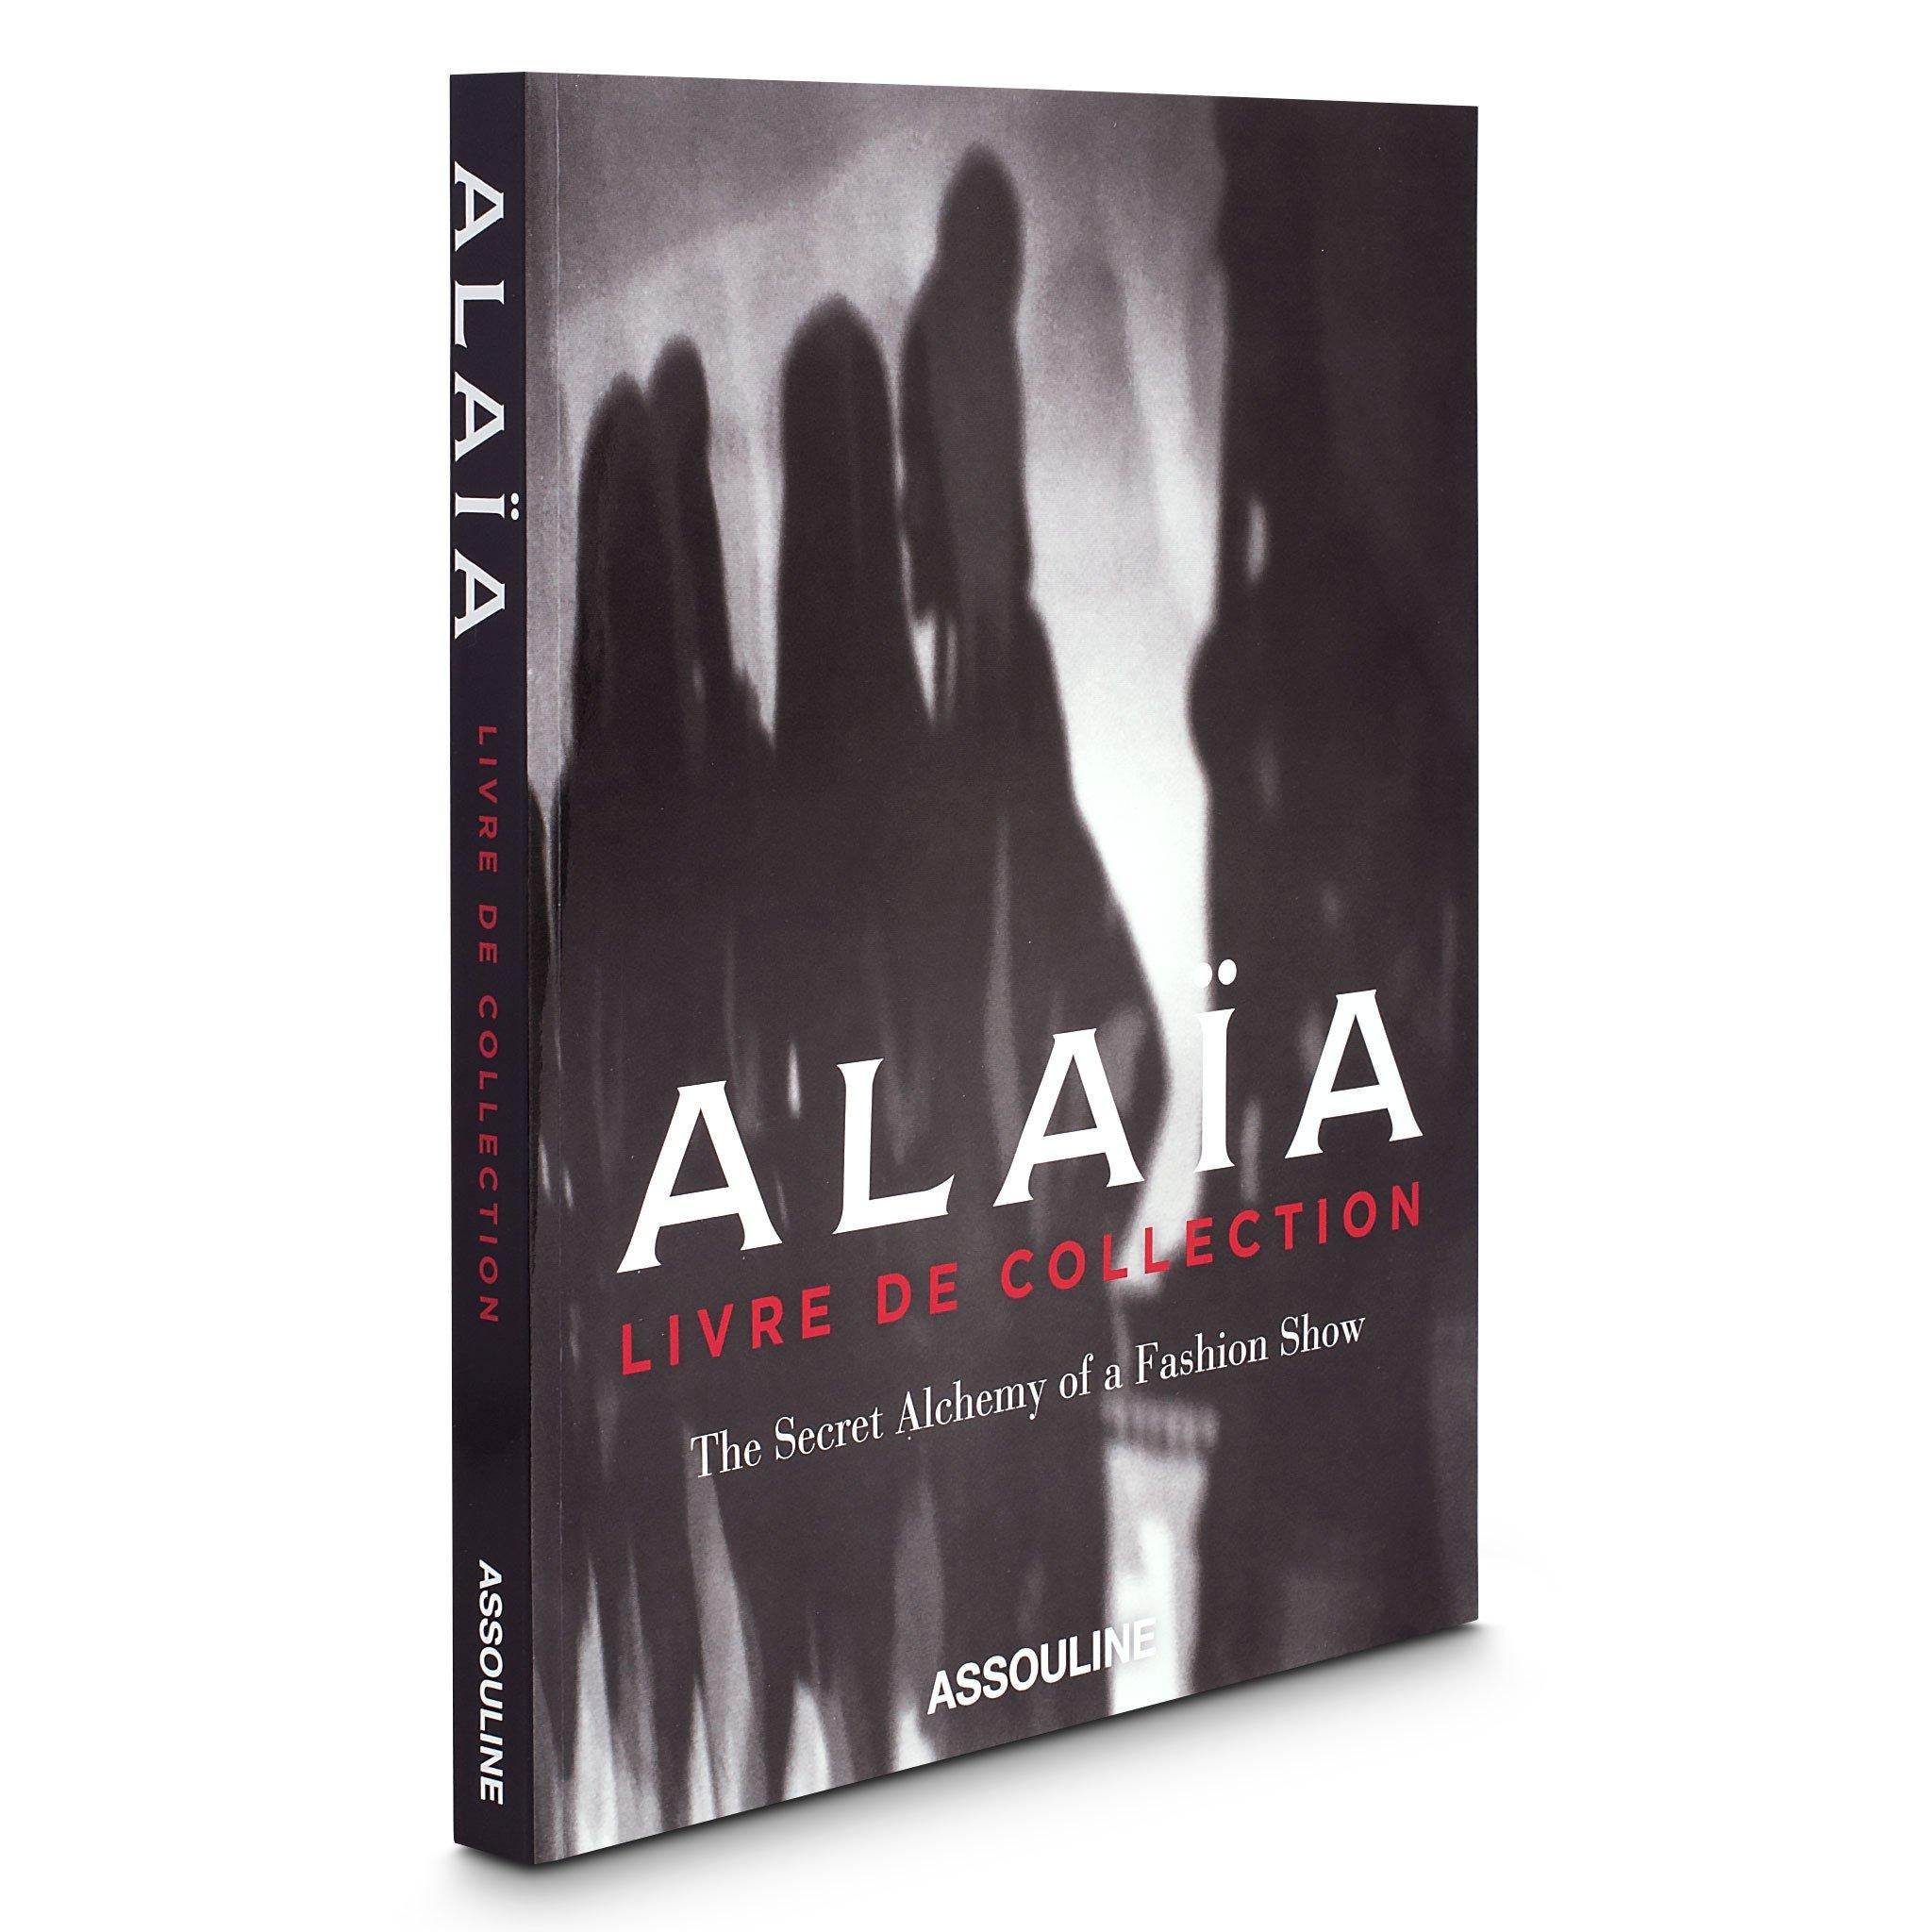 Alaïa: Livre de Collection by Prosper Assouline (Hardcover)
In stock in Los Angeles

For over 35 years, Prosper Assouline and Azzedine Alaïa were close friends. As a tribute to their friendship, Prosper Assouline decided to republish Assouline’s